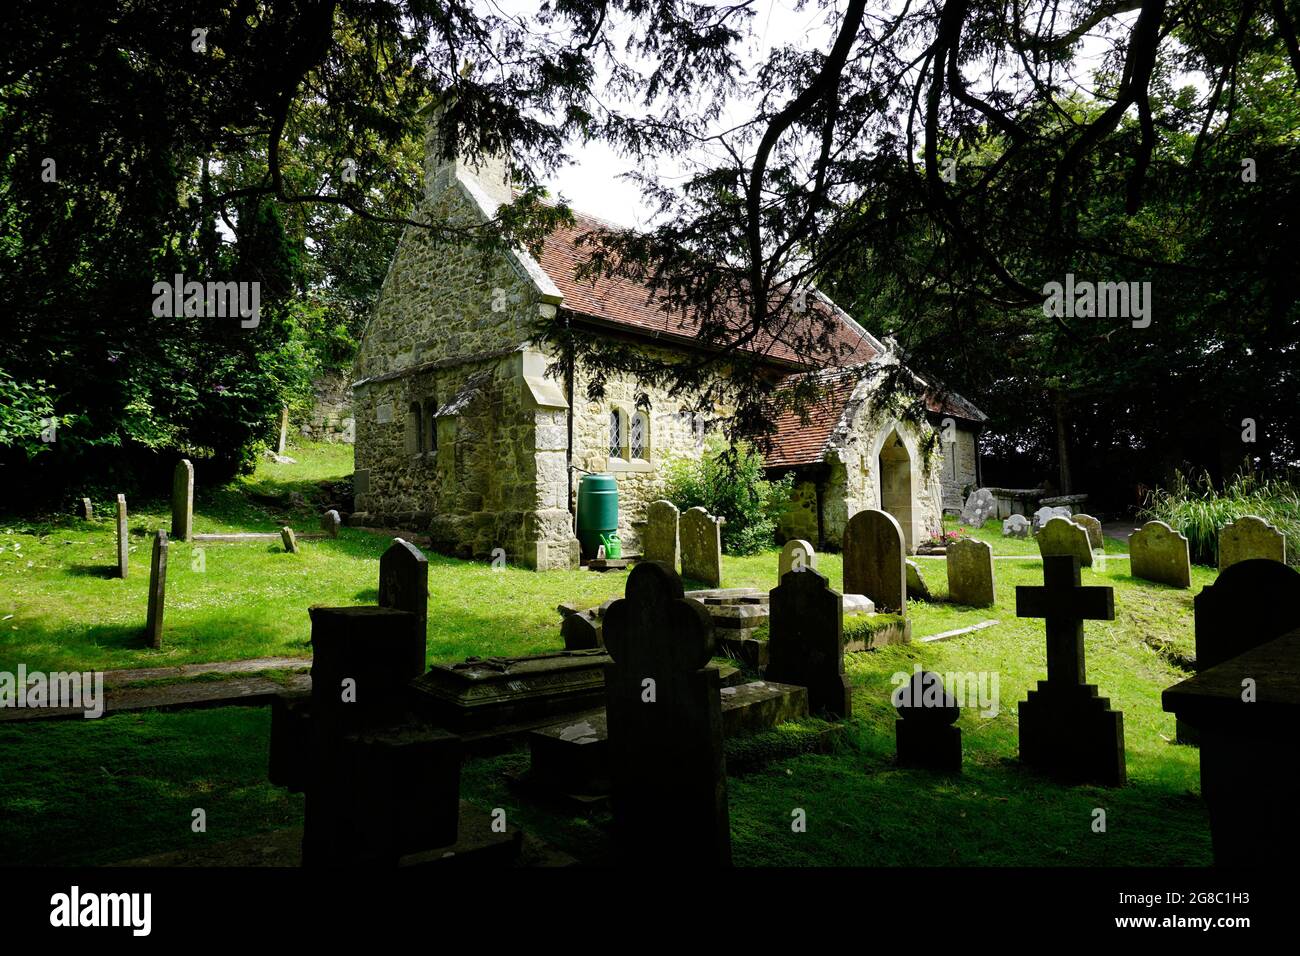 St, Boniface Ancient church dedicated in 1070 in the woodland at Bonchurch on the Isle of Wight. Stock Photo